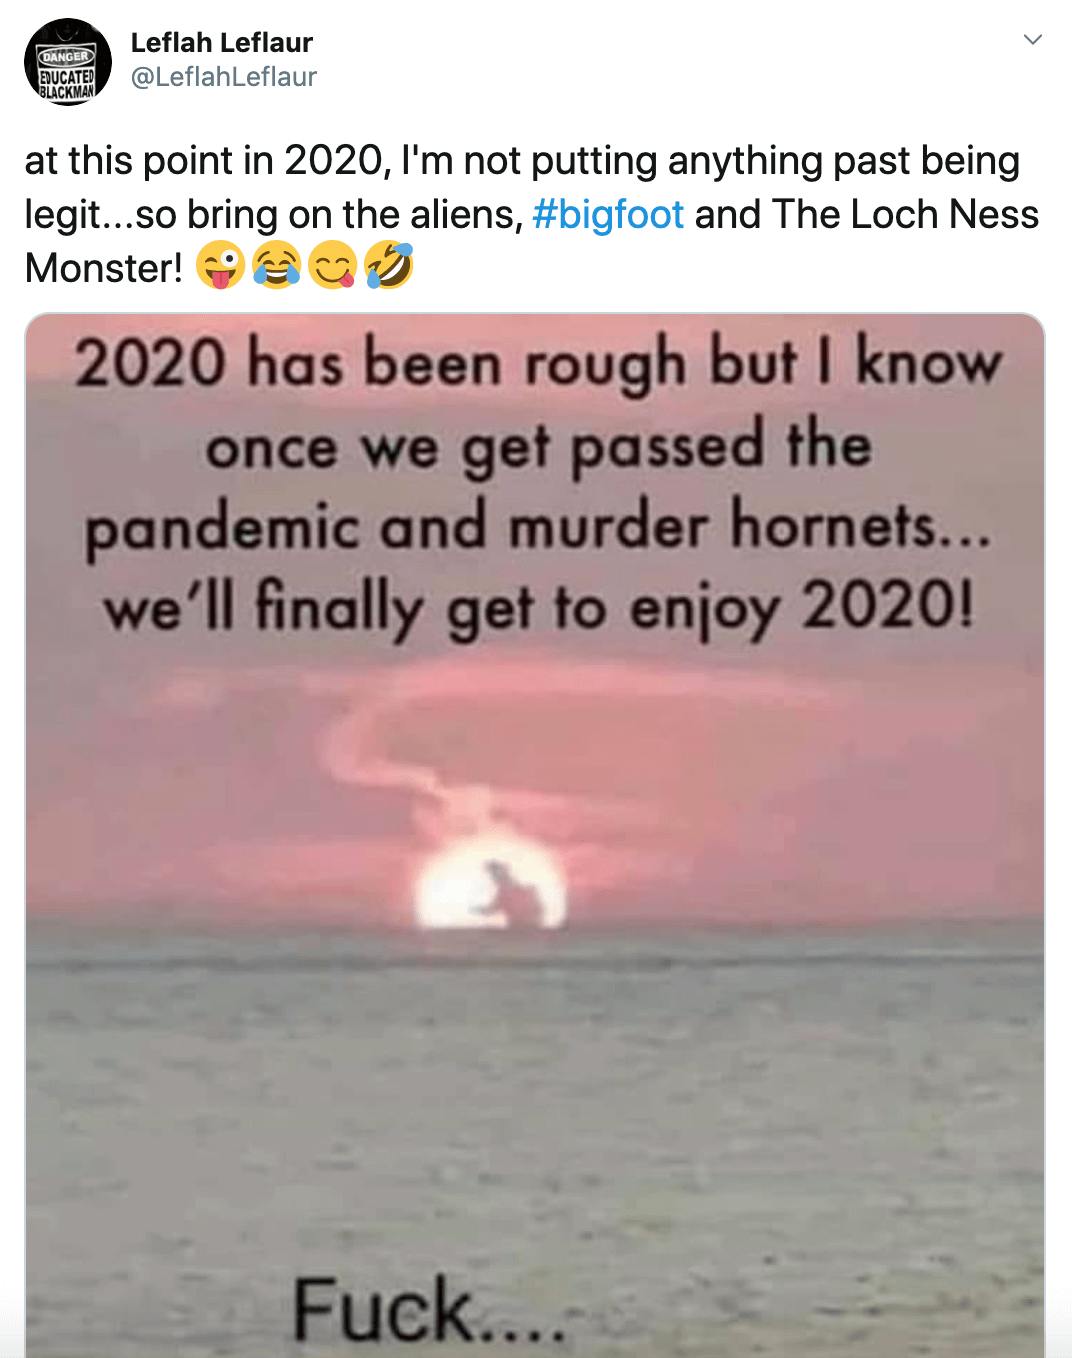 at this point in 2020, I'm not putting anything past being legit...so bring on the aliens, #bigfoot and The Loch Ness Monster! Winking face with tongueFace with tears of joyFace savouring foodRolling on the floor laughing